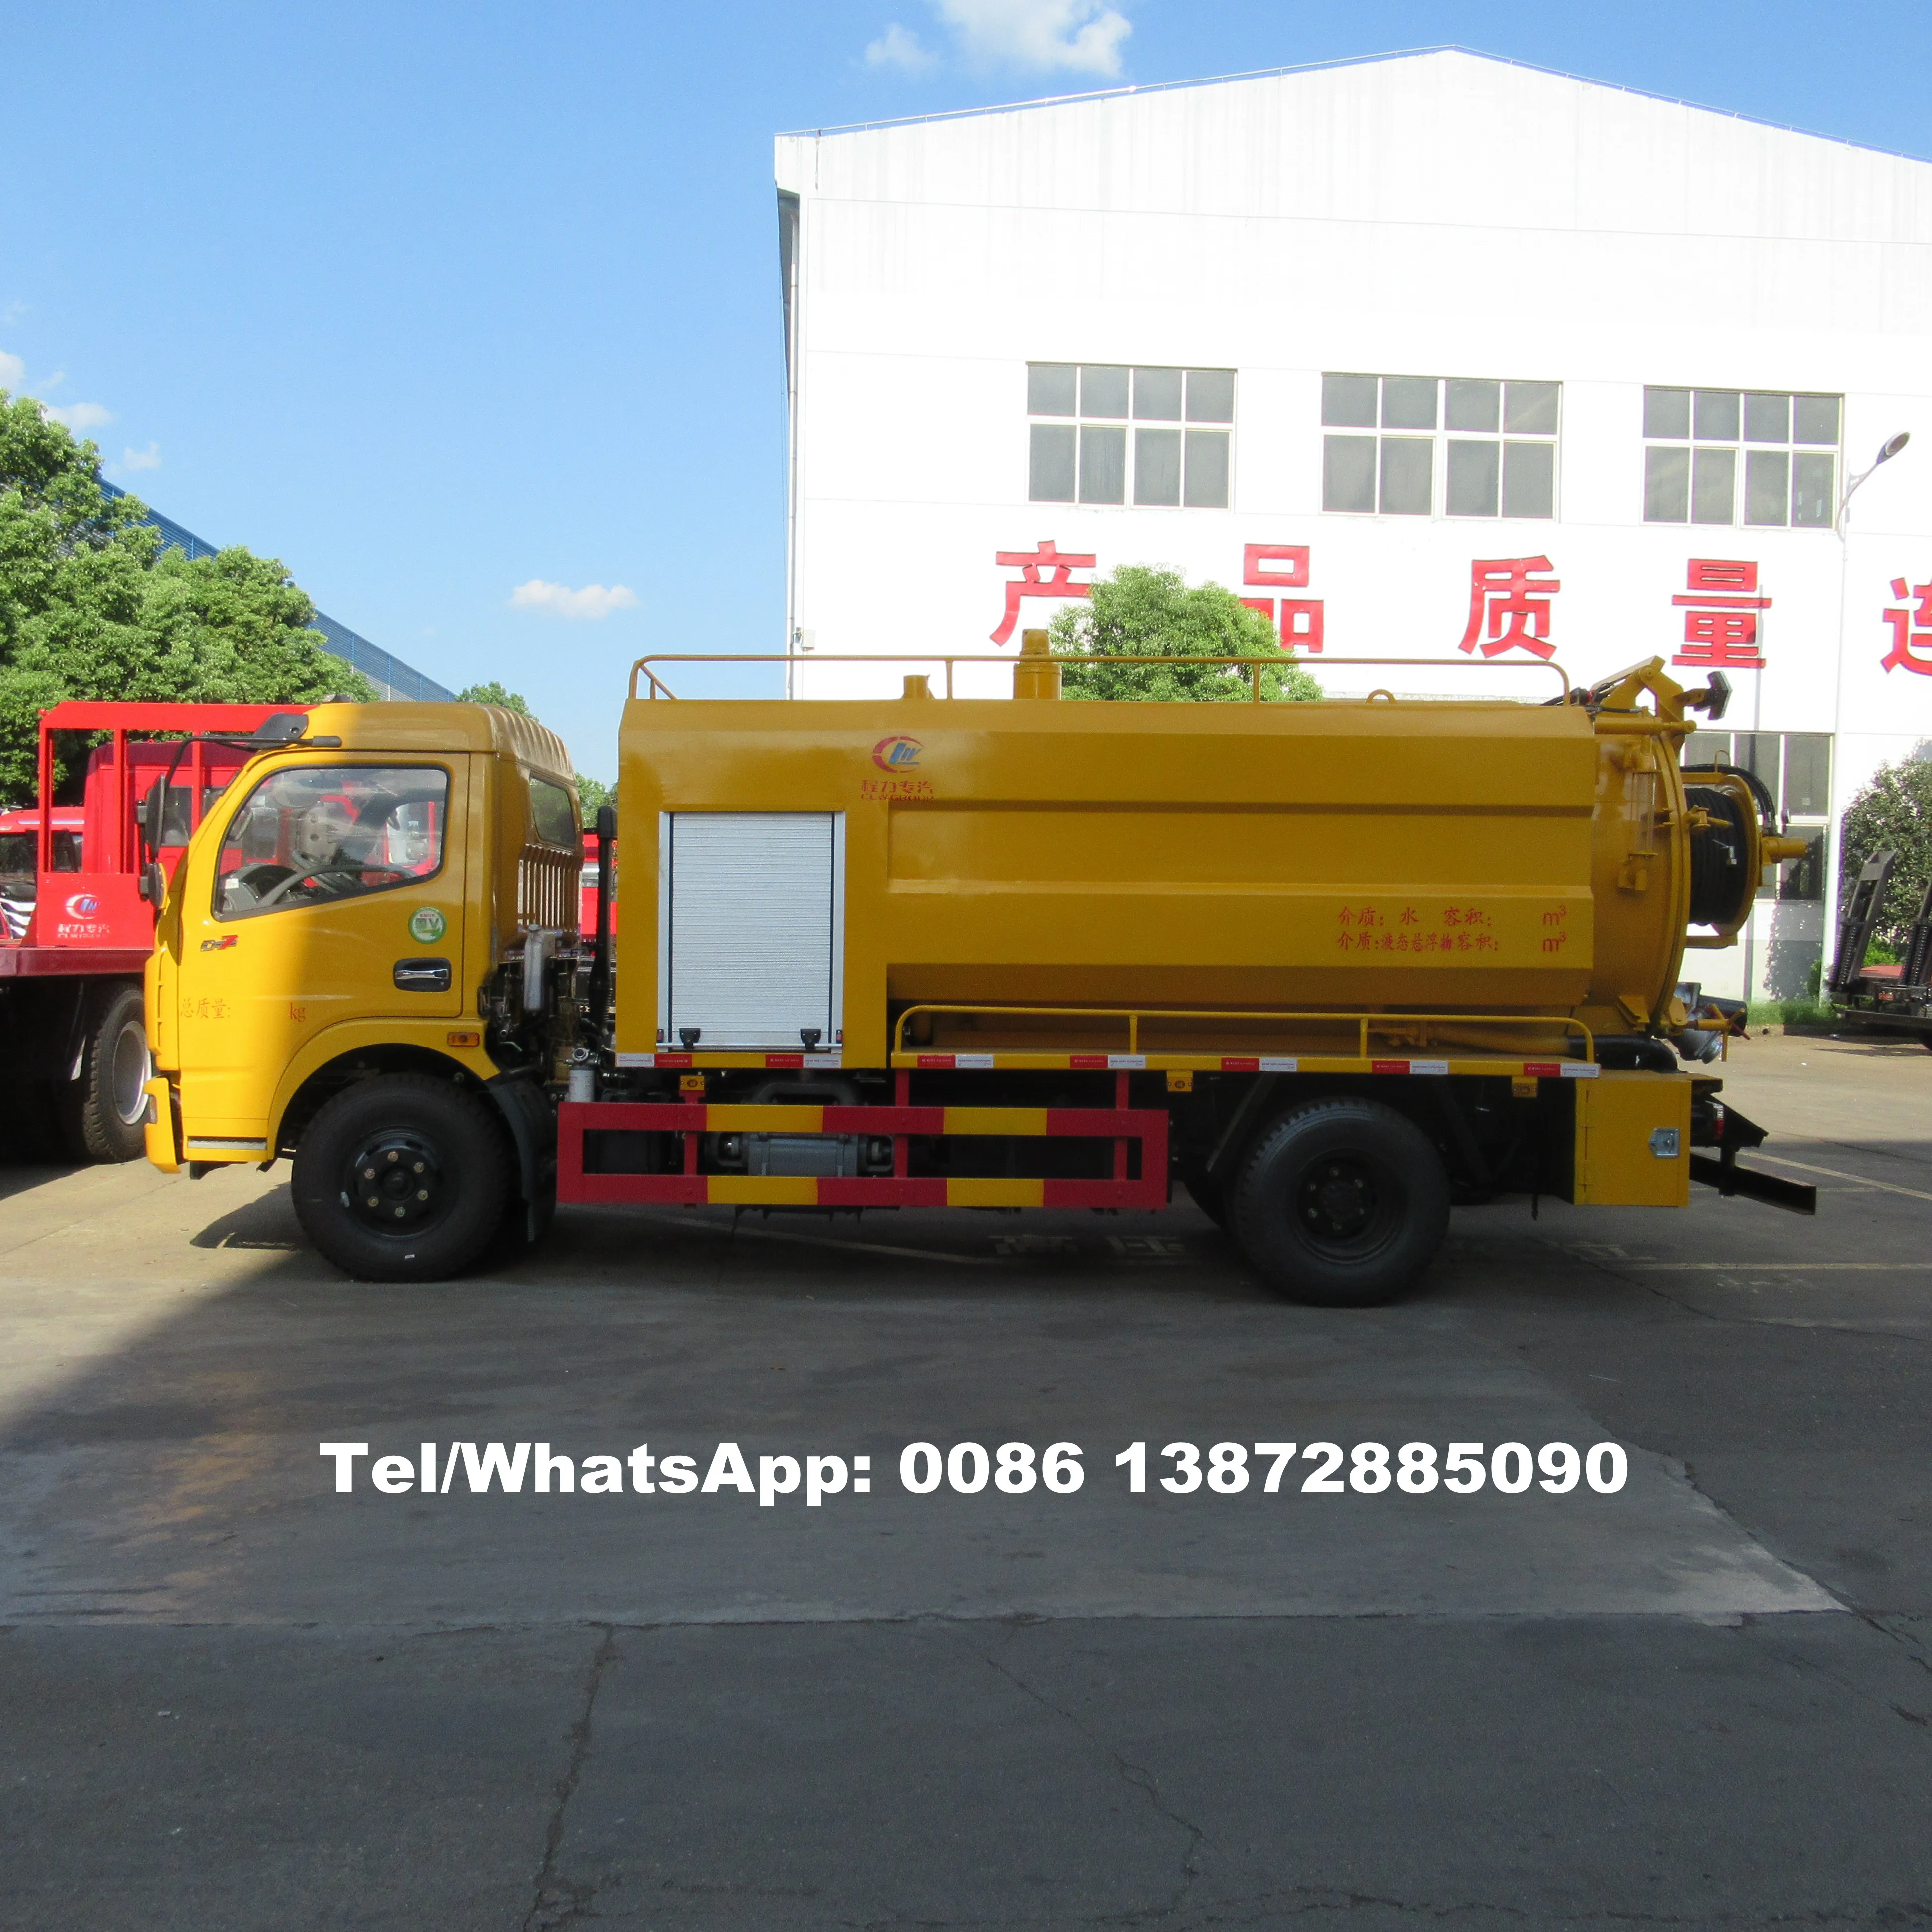 
Brand new dongfeng liquid waste high pressure jetting sewer suction combined vacuum truck for sale 